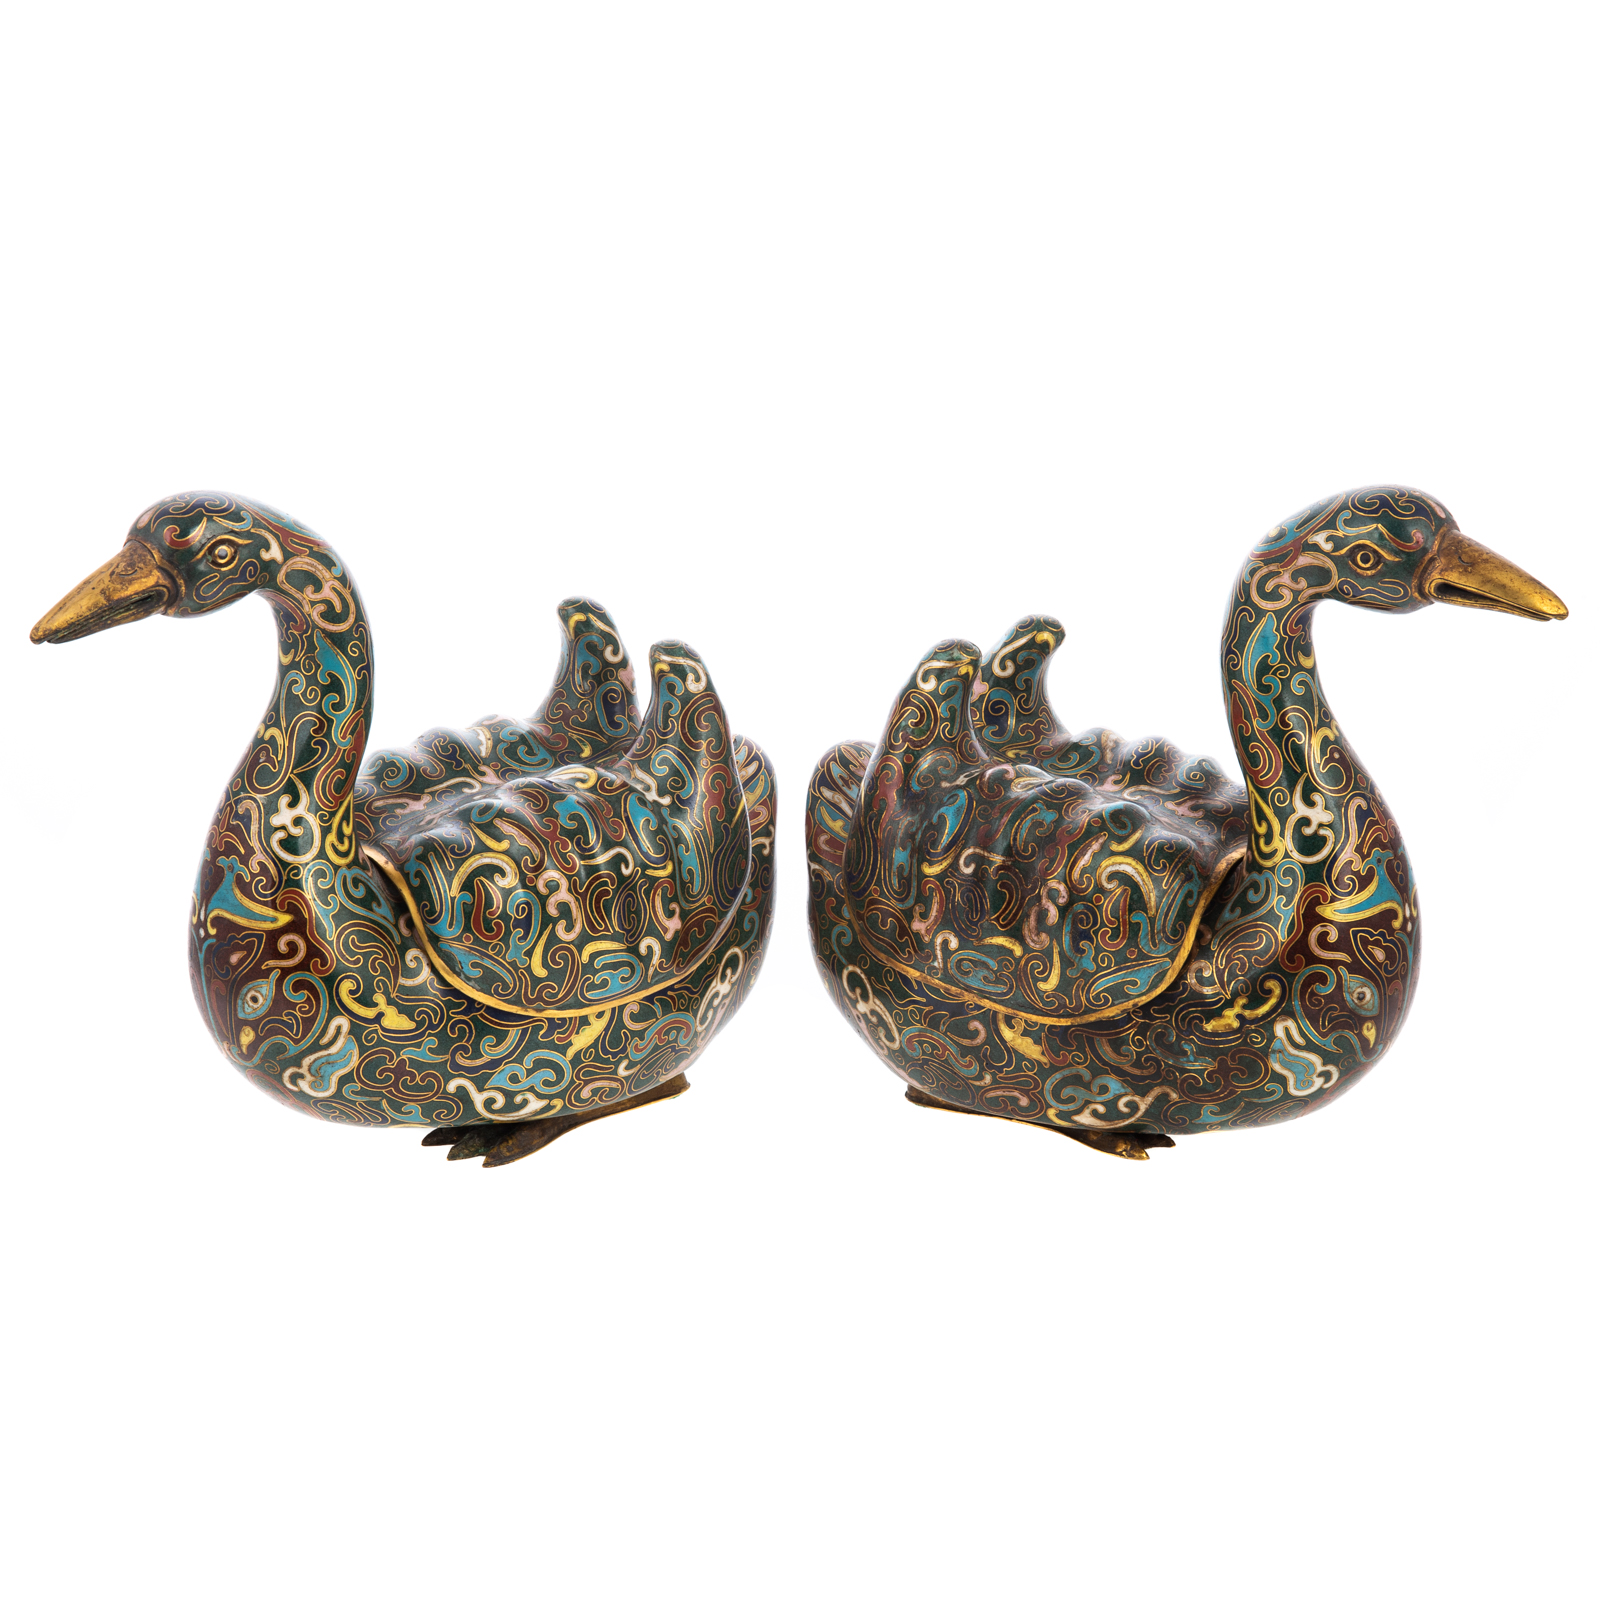 A PAIR OF CHINESE EXPORT CLOISONNE 2e9a44